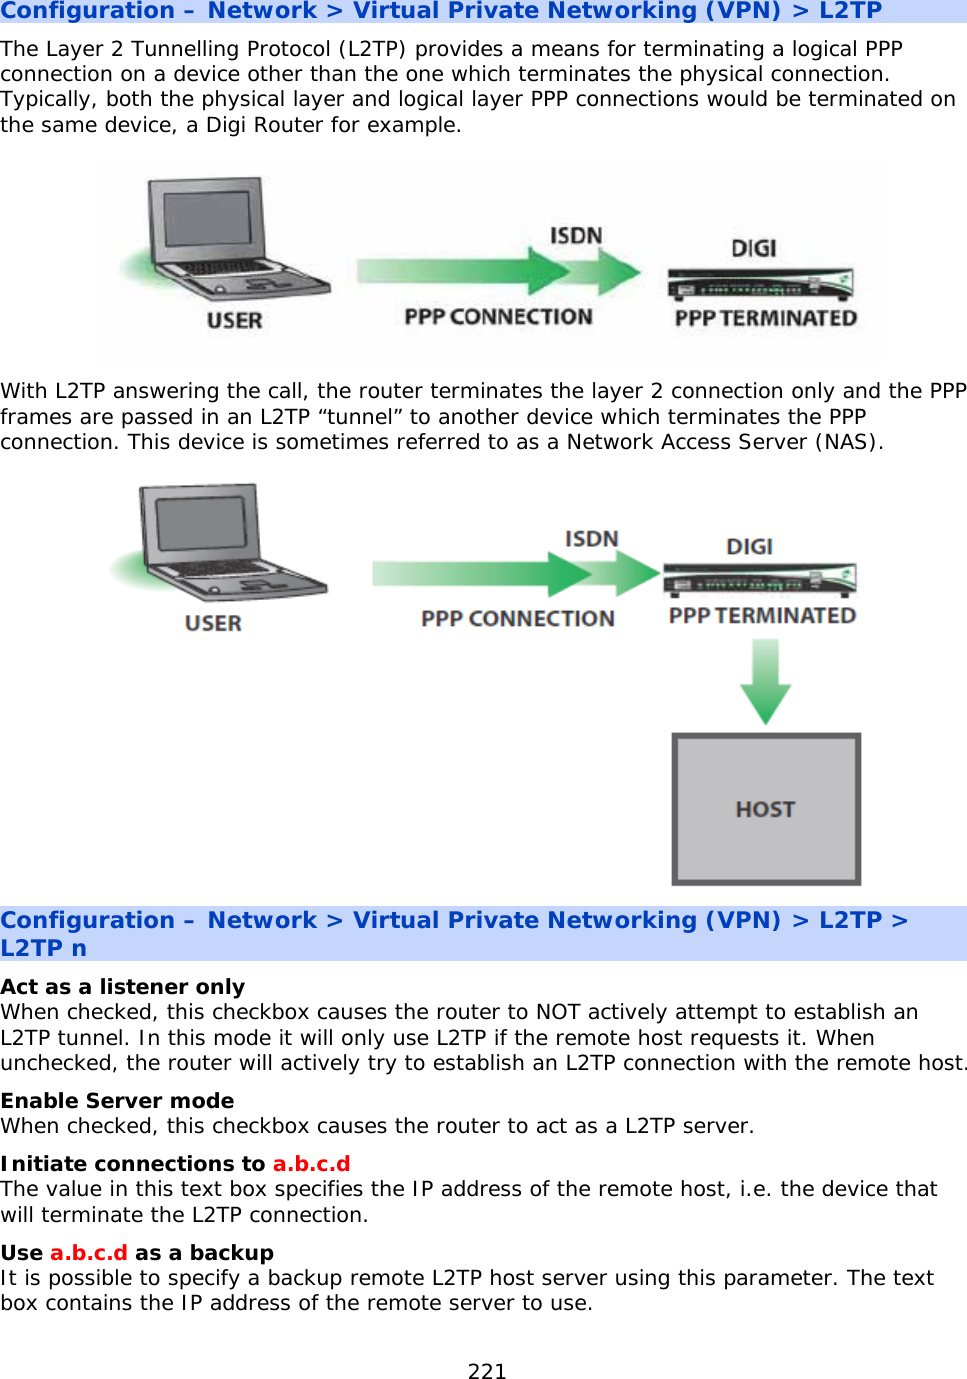 221  Configuration – Network &gt; Virtual Private Networking (VPN) &gt; L2TP The Layer 2 Tunnelling Protocol (L2TP) provides a means for terminating a logical PPP connection on a device other than the one which terminates the physical connection. Typically, both the physical layer and logical layer PPP connections would be terminated on the same device, a Digi Router for example.  With L2TP answering the call, the router terminates the layer 2 connection only and the PPP frames are passed in an L2TP “tunnel” to another device which terminates the PPP connection. This device is sometimes referred to as a Network Access Server (NAS).  Configuration – Network &gt; Virtual Private Networking (VPN) &gt; L2TP &gt; L2TP n Act as a listener only  When checked, this checkbox causes the router to NOT actively attempt to establish an L2TP tunnel. In this mode it will only use L2TP if the remote host requests it. When unchecked, the router will actively try to establish an L2TP connection with the remote host. Enable Server mode When checked, this checkbox causes the router to act as a L2TP server. Initiate connections to a.b.c.d The value in this text box specifies the IP address of the remote host, i.e. the device that will terminate the L2TP connection. Use a.b.c.d as a backup It is possible to specify a backup remote L2TP host server using this parameter. The text box contains the IP address of the remote server to use. 